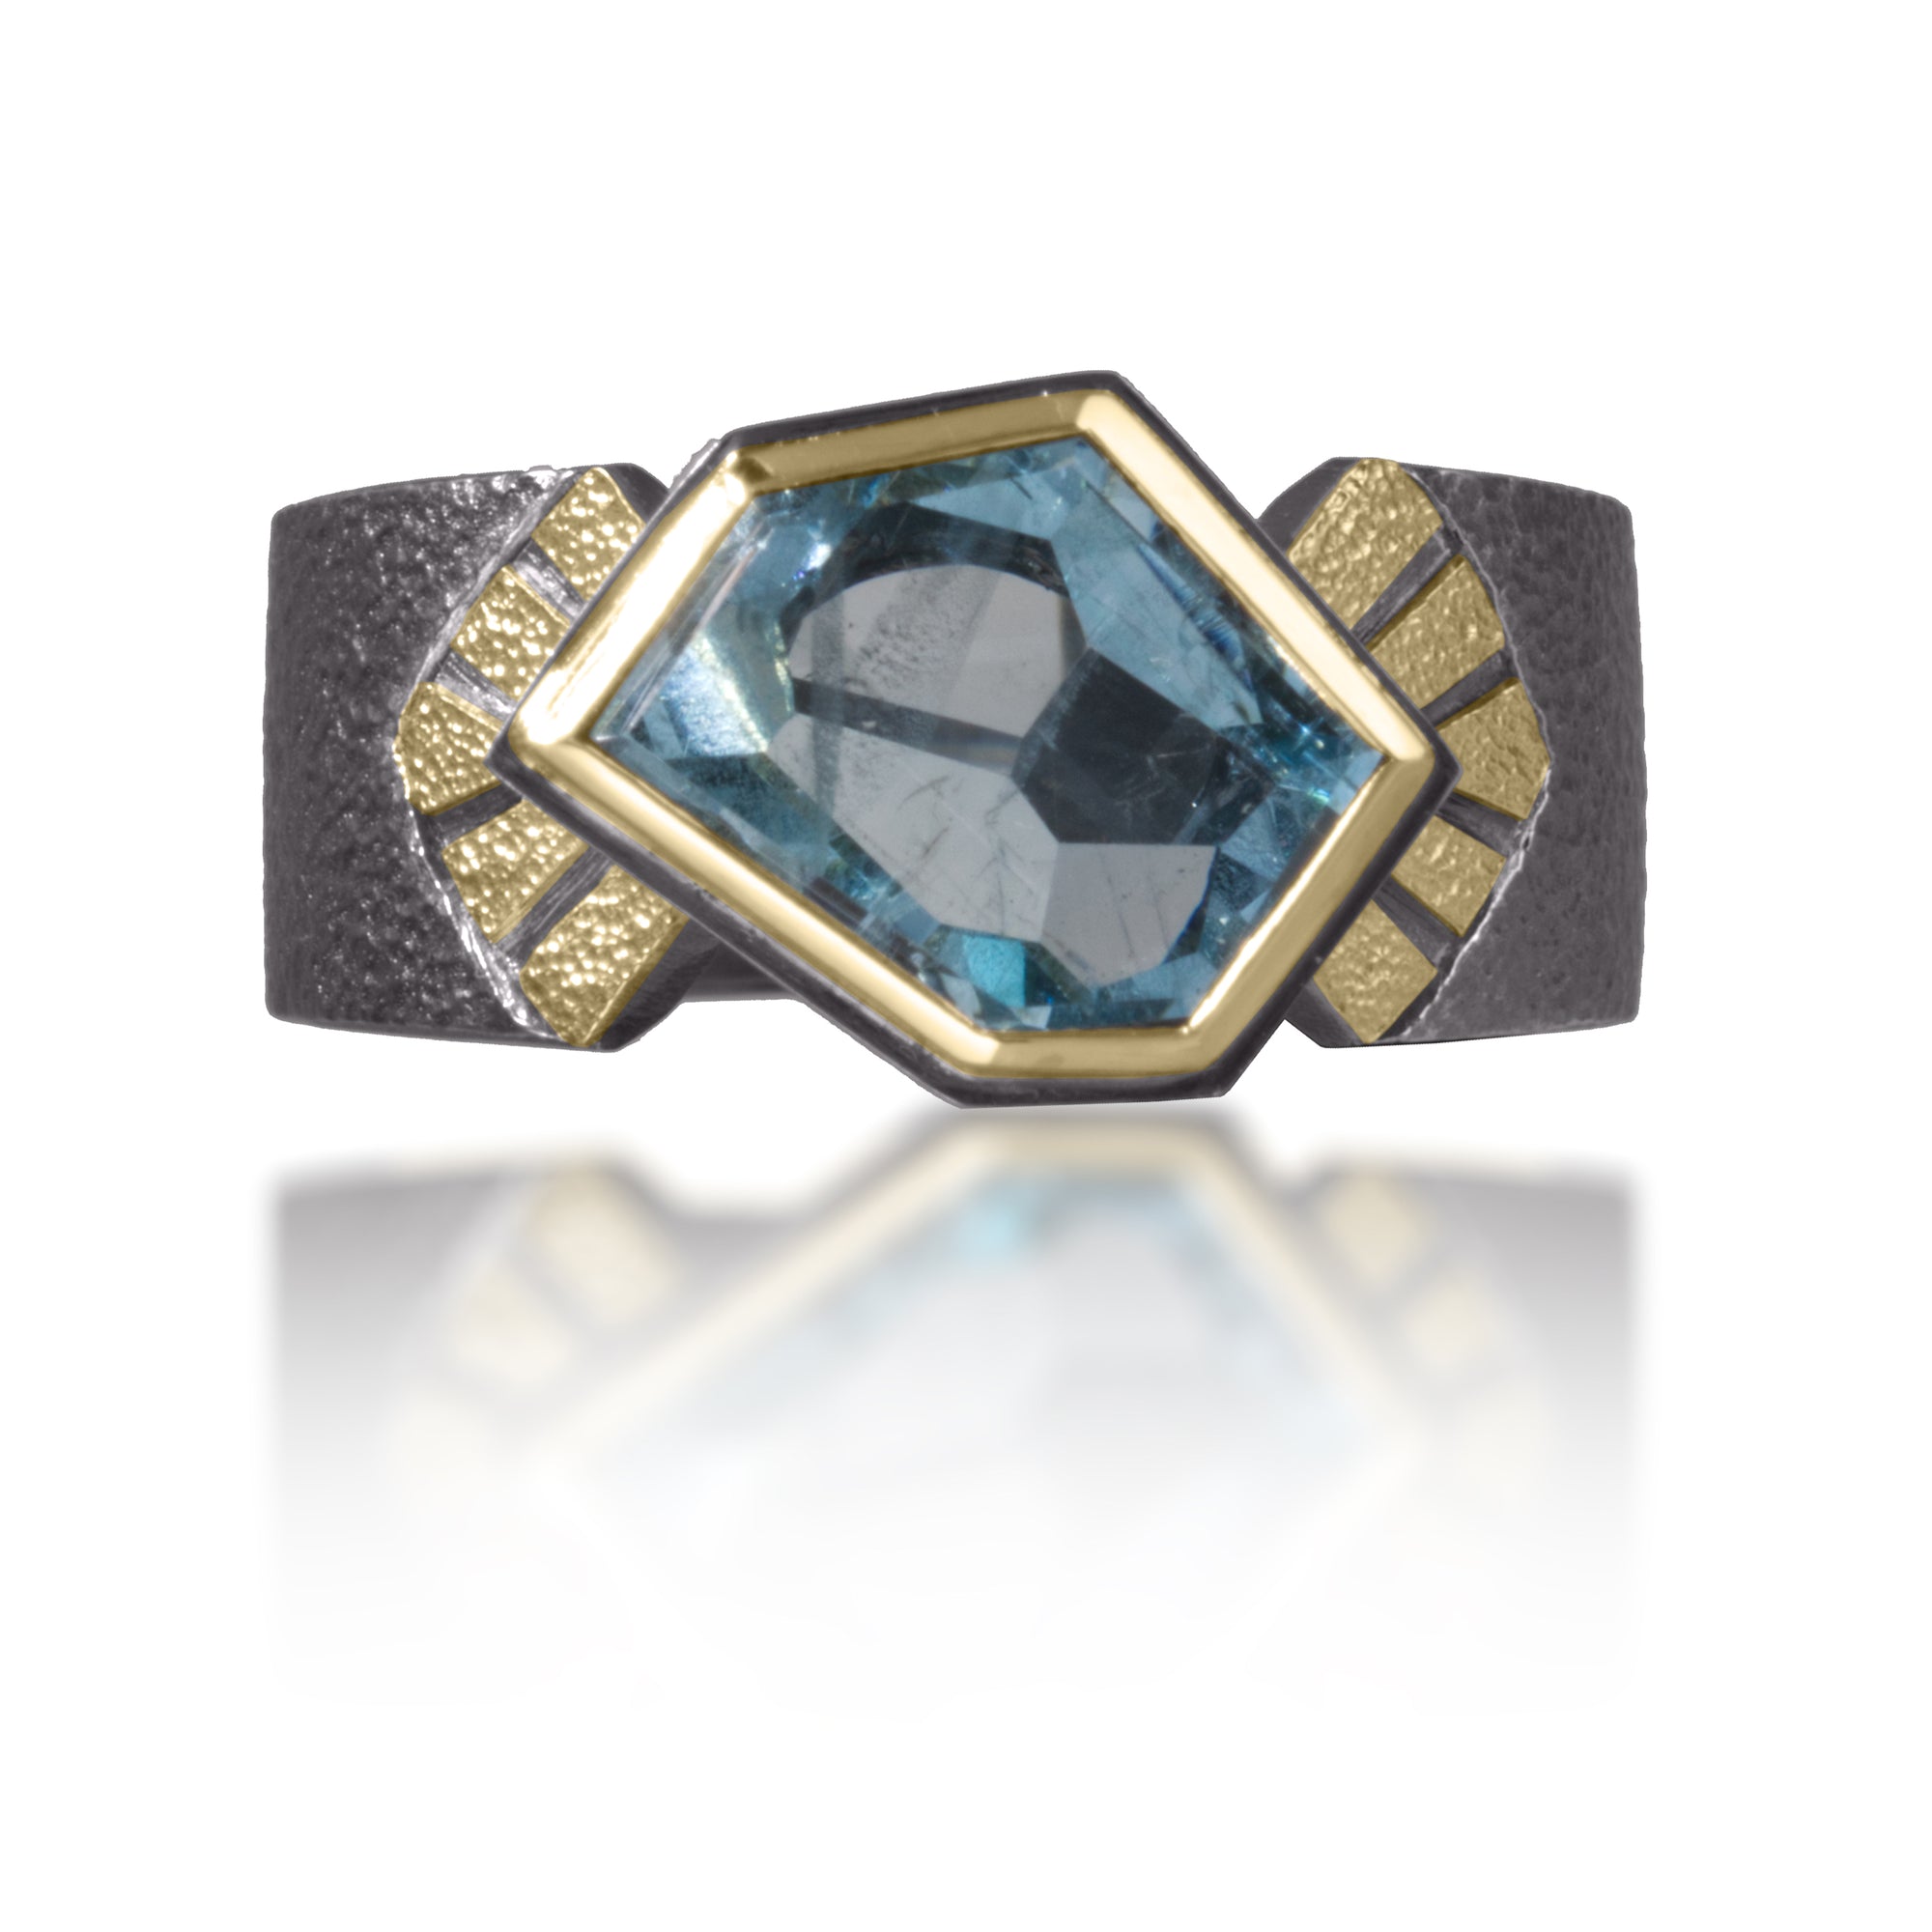 Stripe Ring #6 in 18k gold and oxidized sterling silver with a bezel set, one of a kind, angular aquamarine gem, 2.06 tcw. Hand fabricated, stipple textured and engraved mixed metals. The band measures 9mm at the widest point, narrowing to 5.5mm in the back.